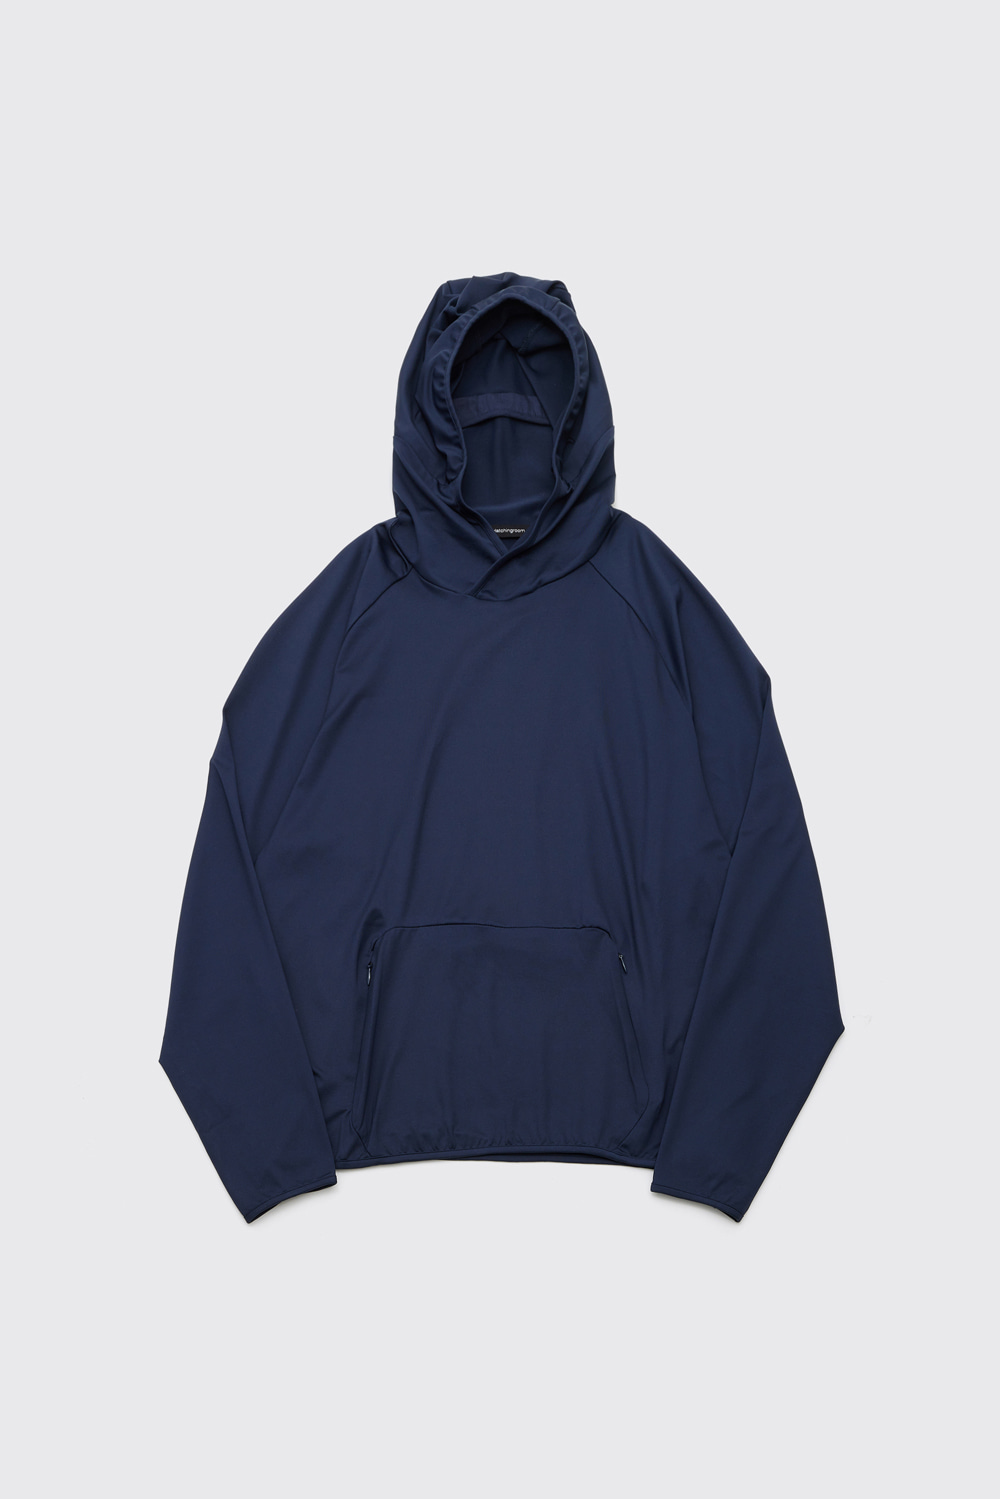 [Obscura Exclusive] Layering Hoodie Navy